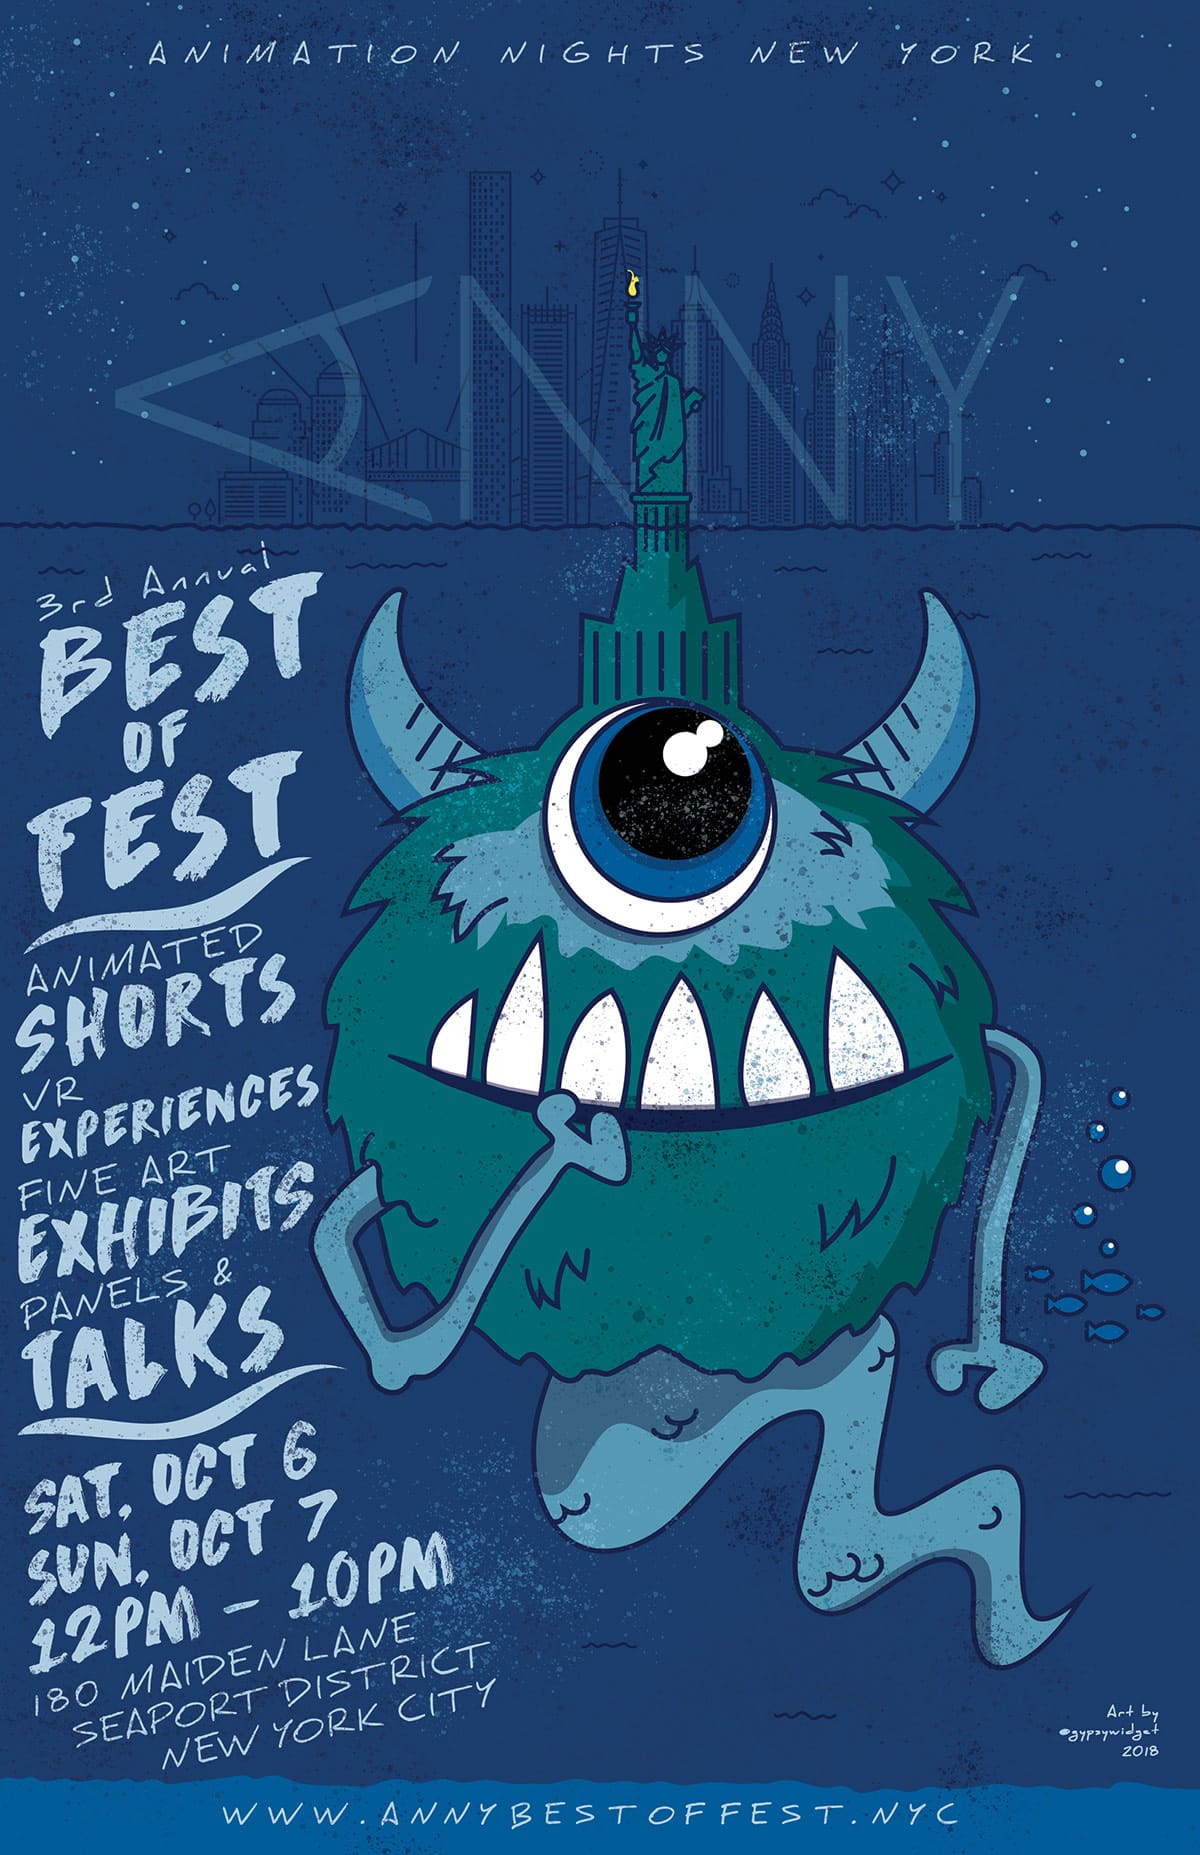 ANNY Best of Fest 2018 poster.